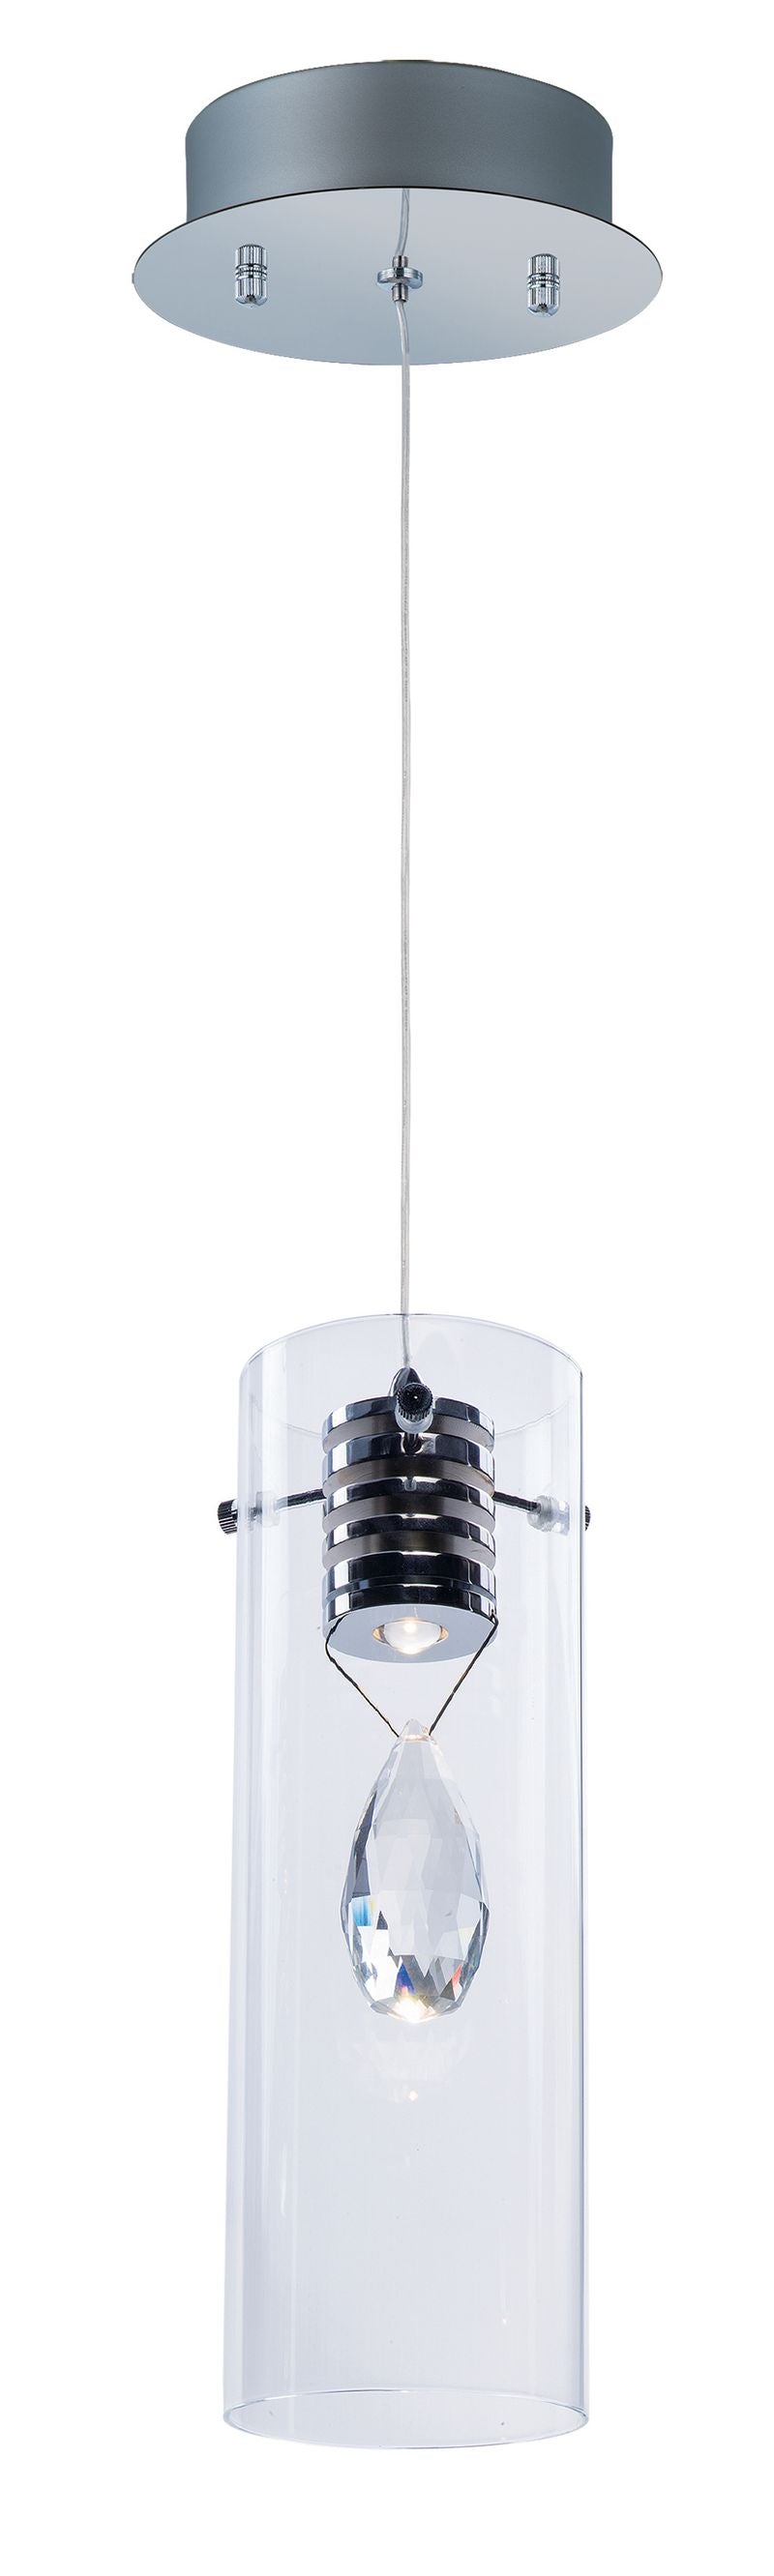 Solitaire 4.25' Single Light Pendant in Polished Chrome